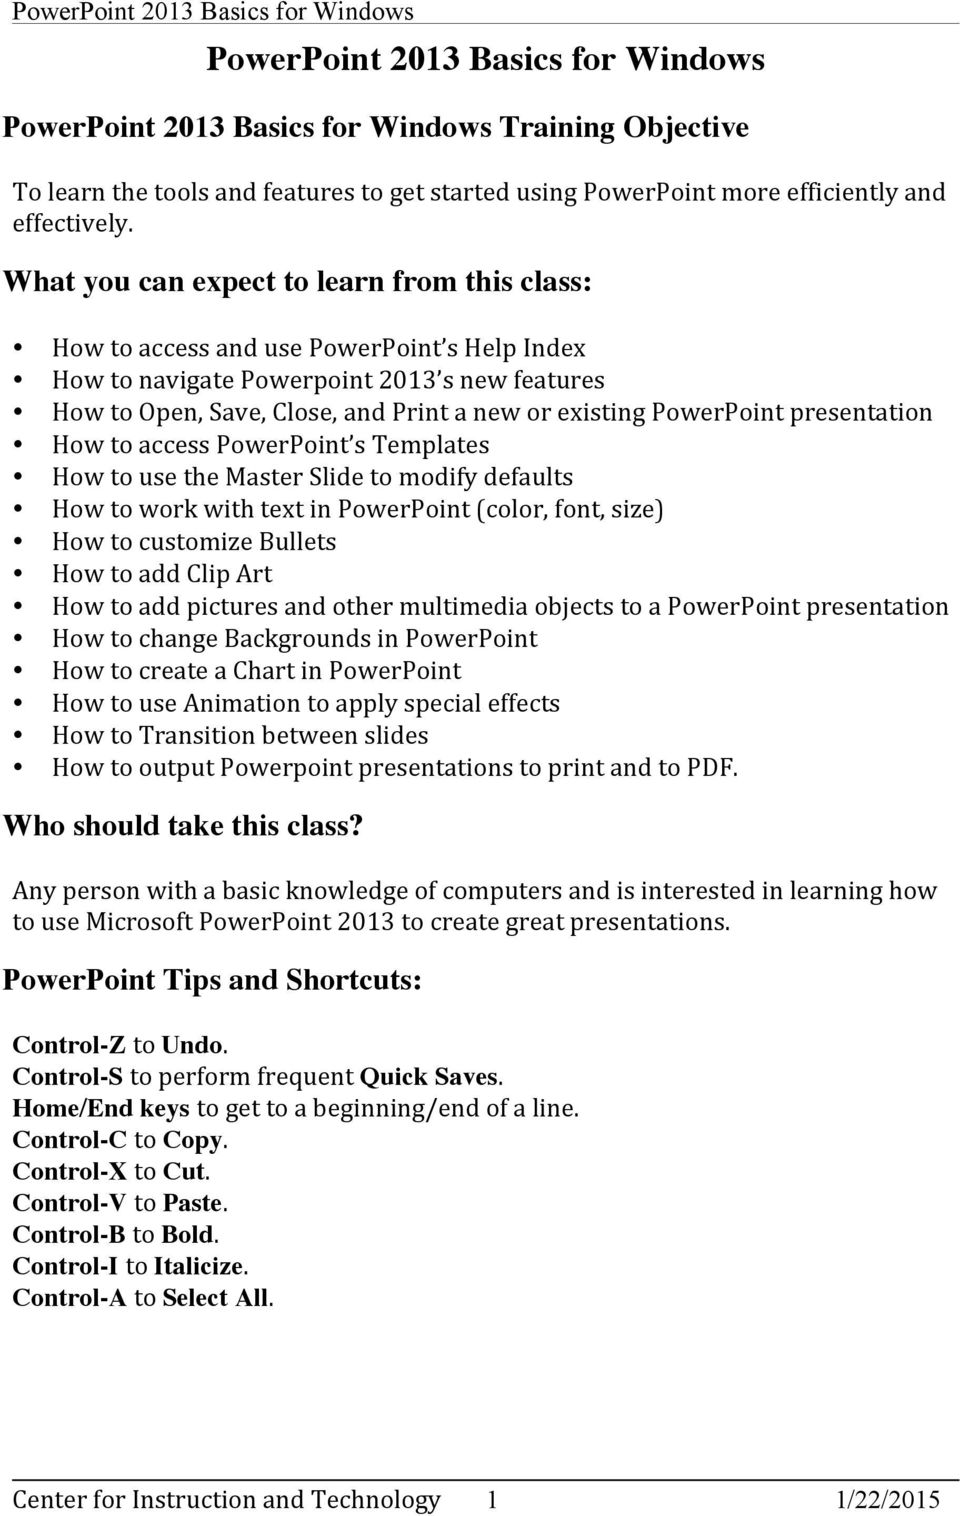 PowerPoint presentation How to access PowerPoint s Templates How to use the Master Slide to modify defaults How to work with text in PowerPoint (color, font, size) How to customize Bullets How to add